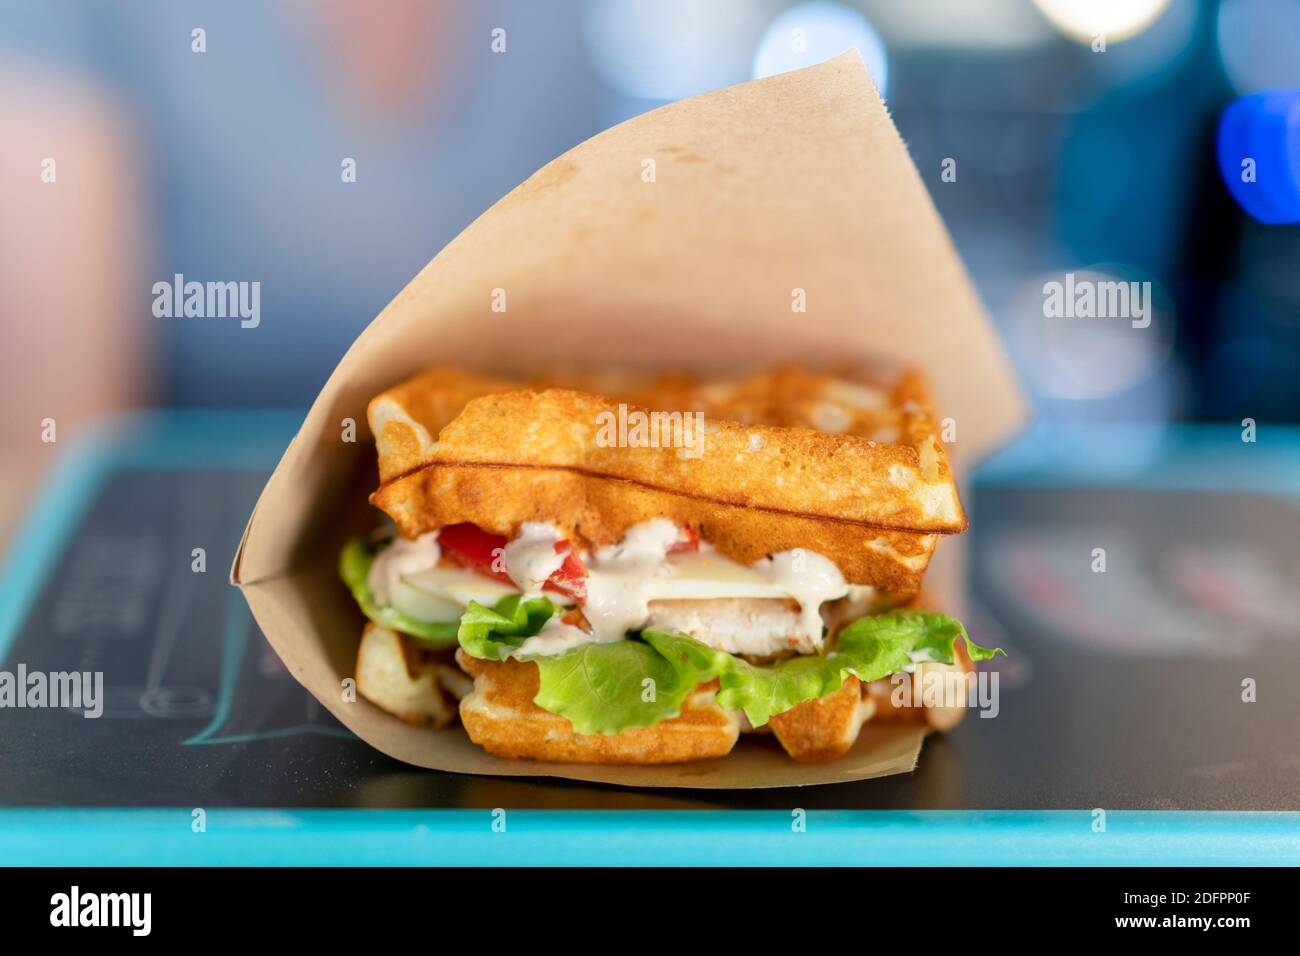 Sandwich In A Paper Bag Close Up Sandwich Filet Americain Close Up Of Burger Fast But Unhealthy Food Stock Photo Alamy